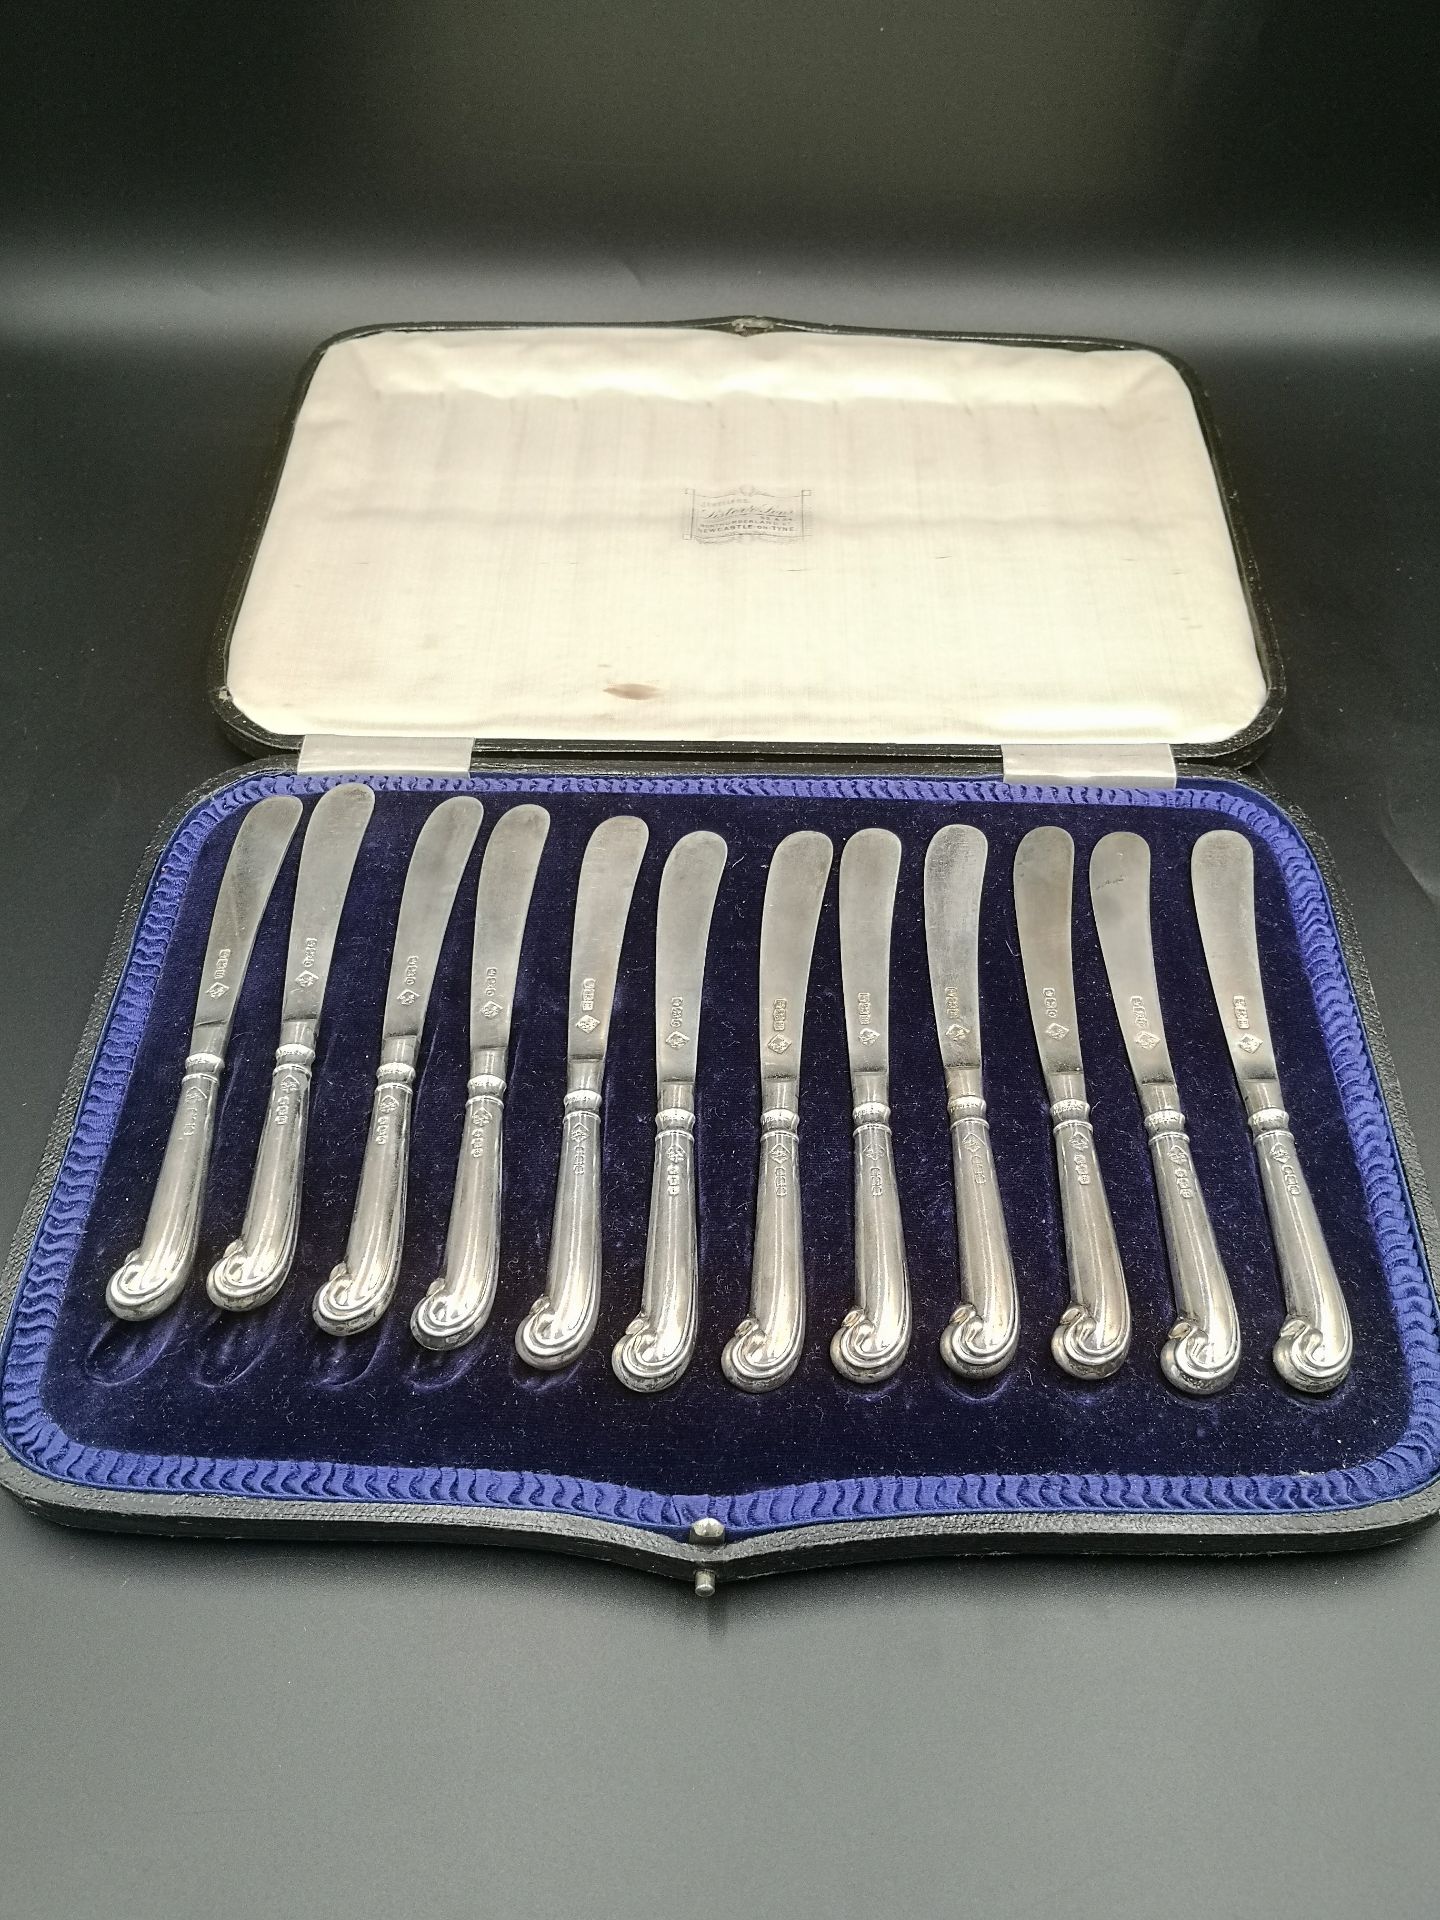 Boxed set of twelve silver butter knives - Image 4 of 4